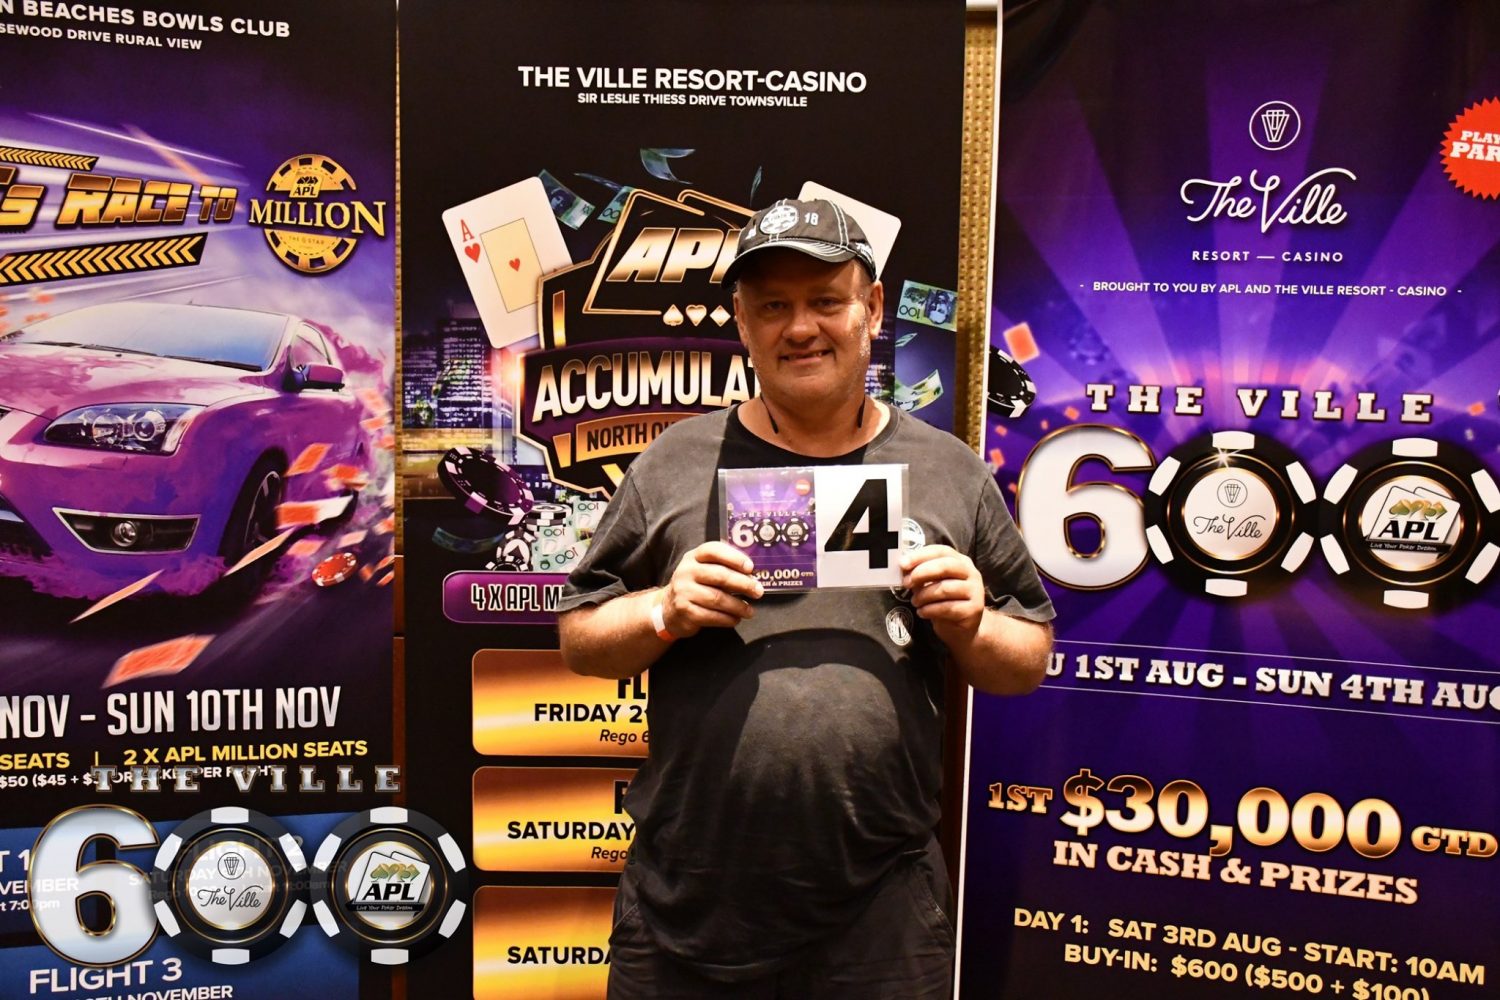 Super High Roller Andy Ryland Mackay 4th Place $10,000 Cash